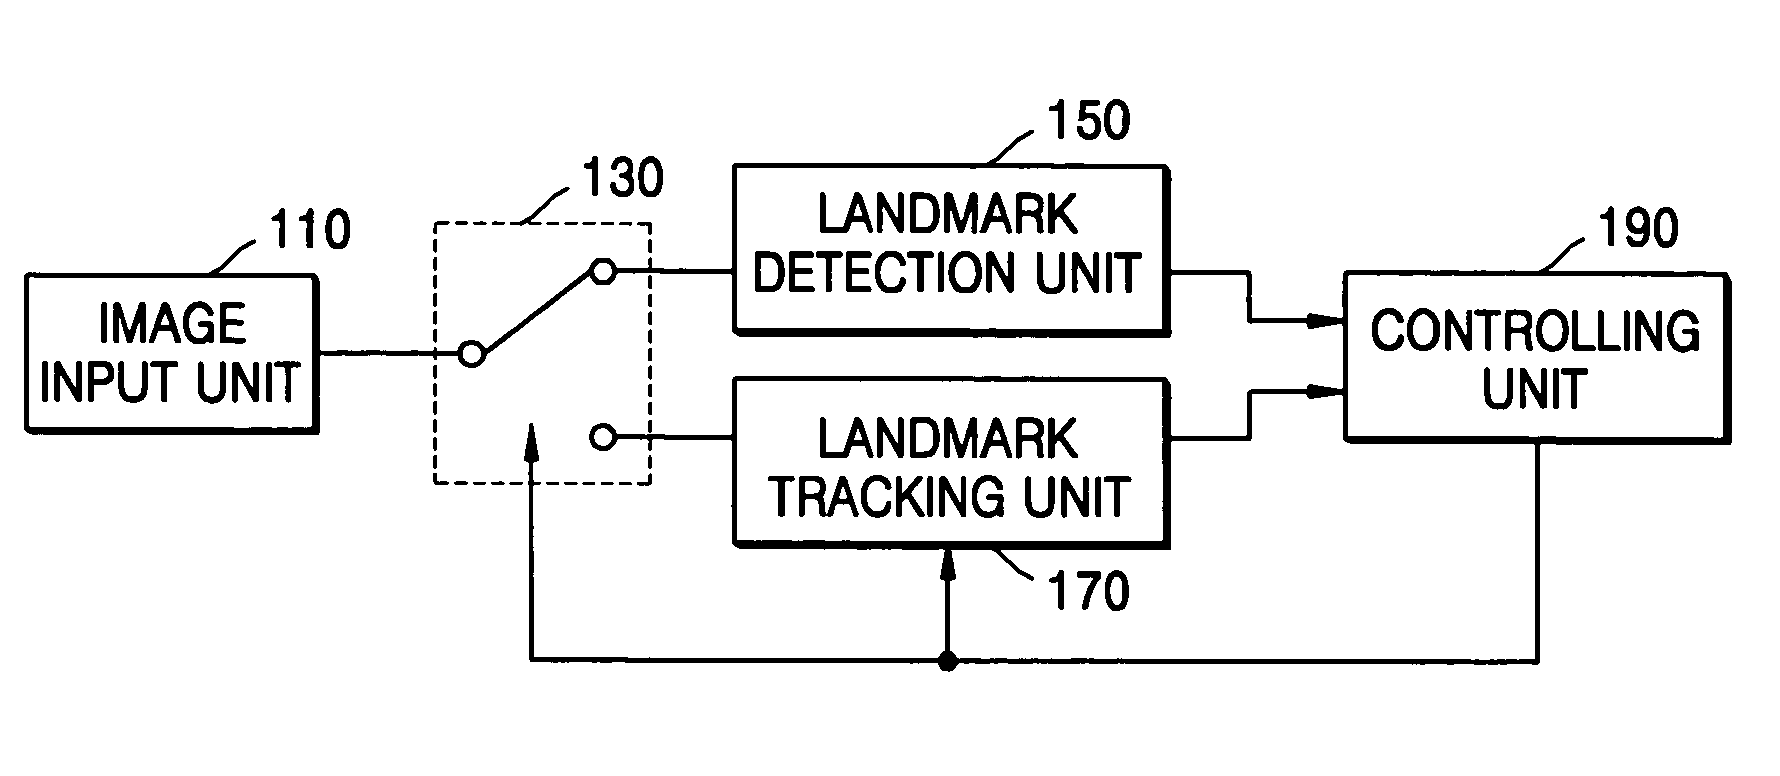 Landmark detection apparatus and method for intelligent system